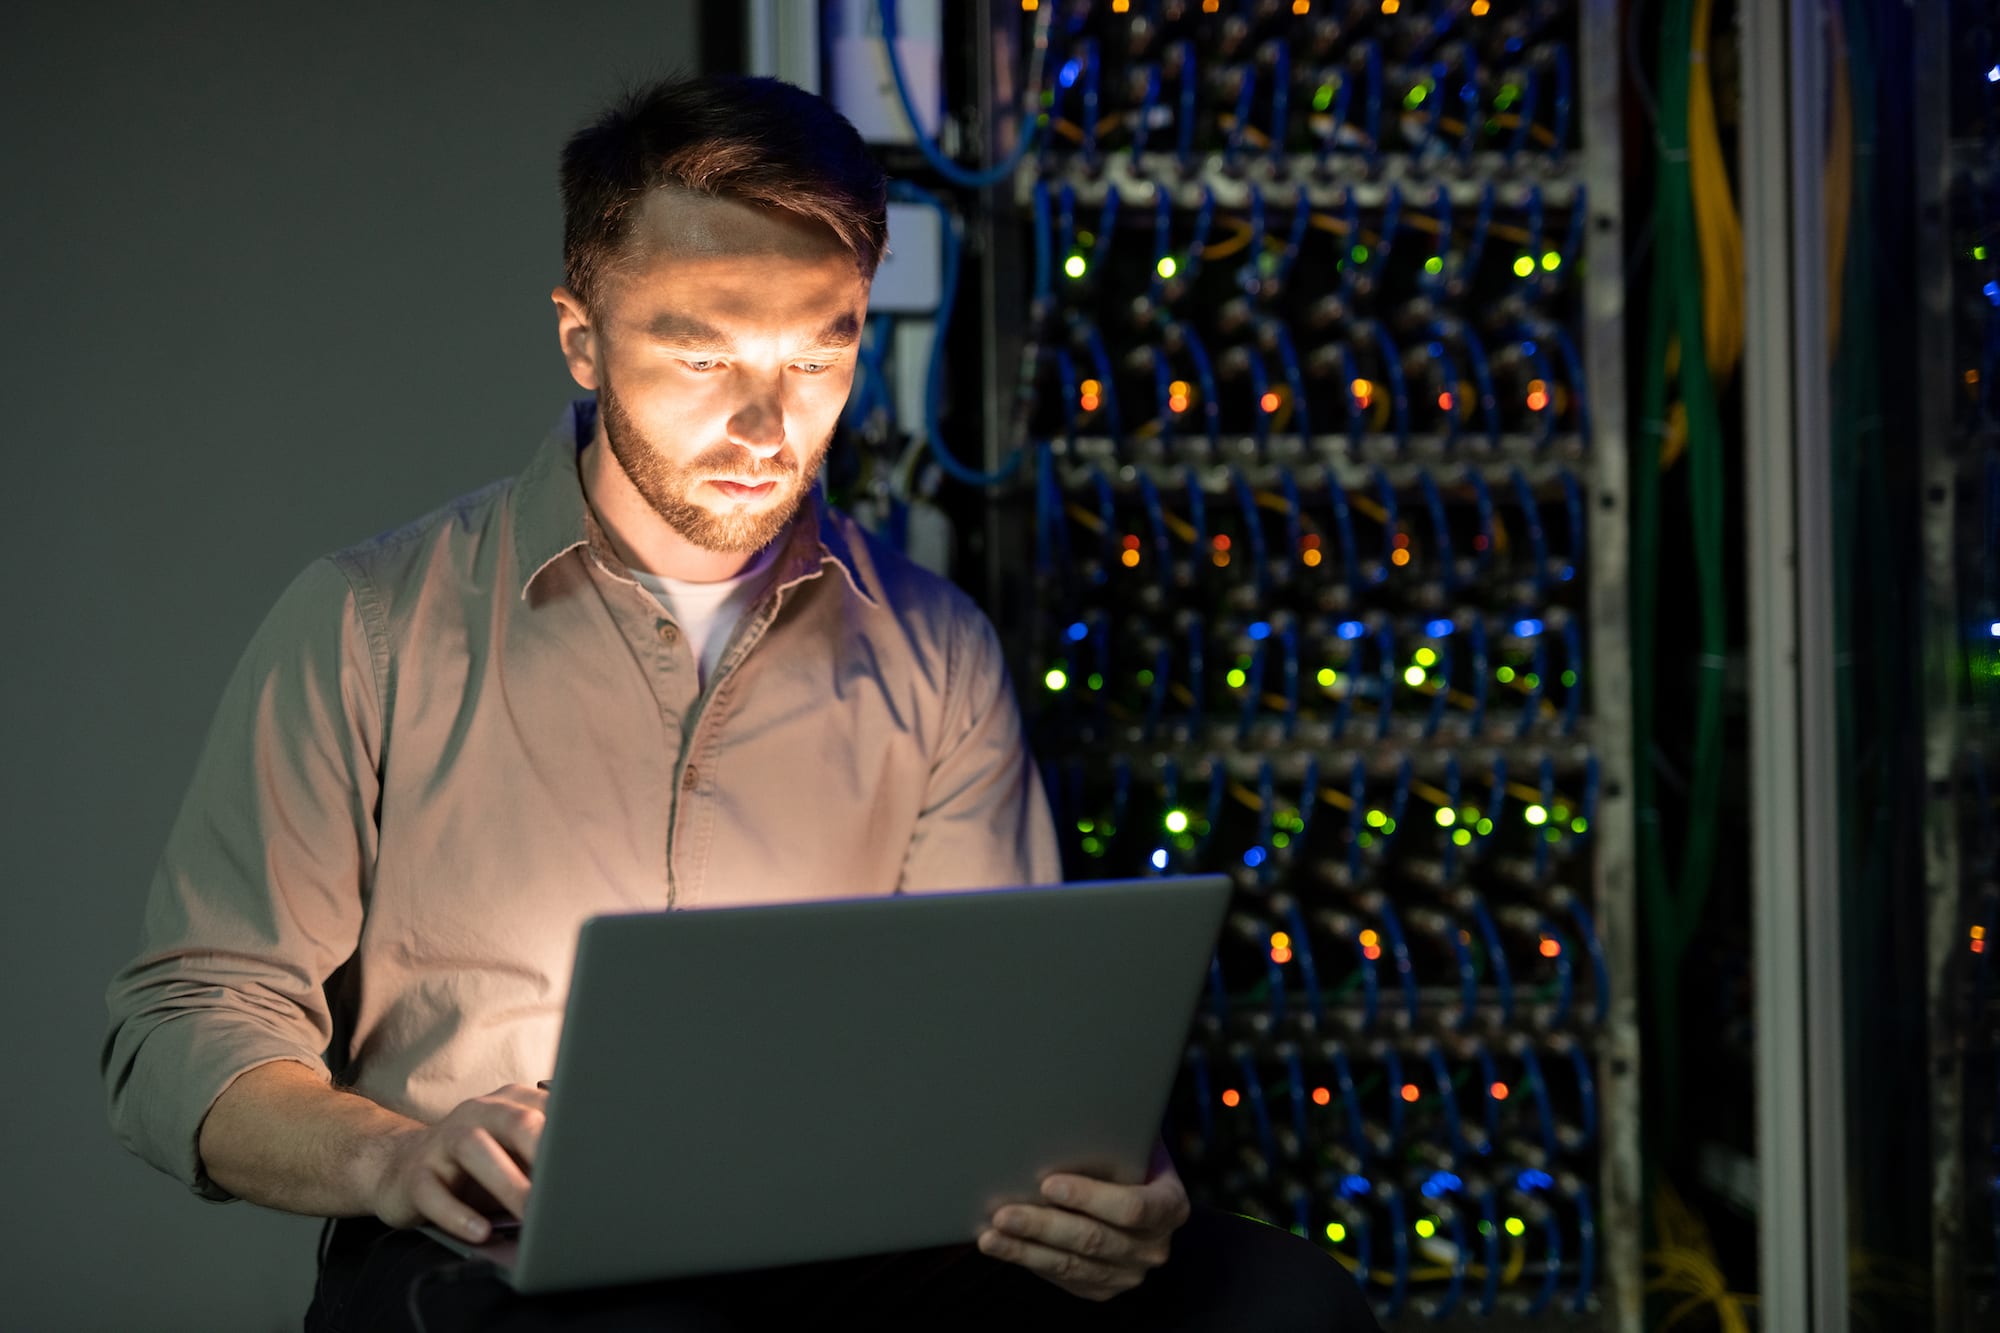 Everything You Should Know About Data Center Decommissioning